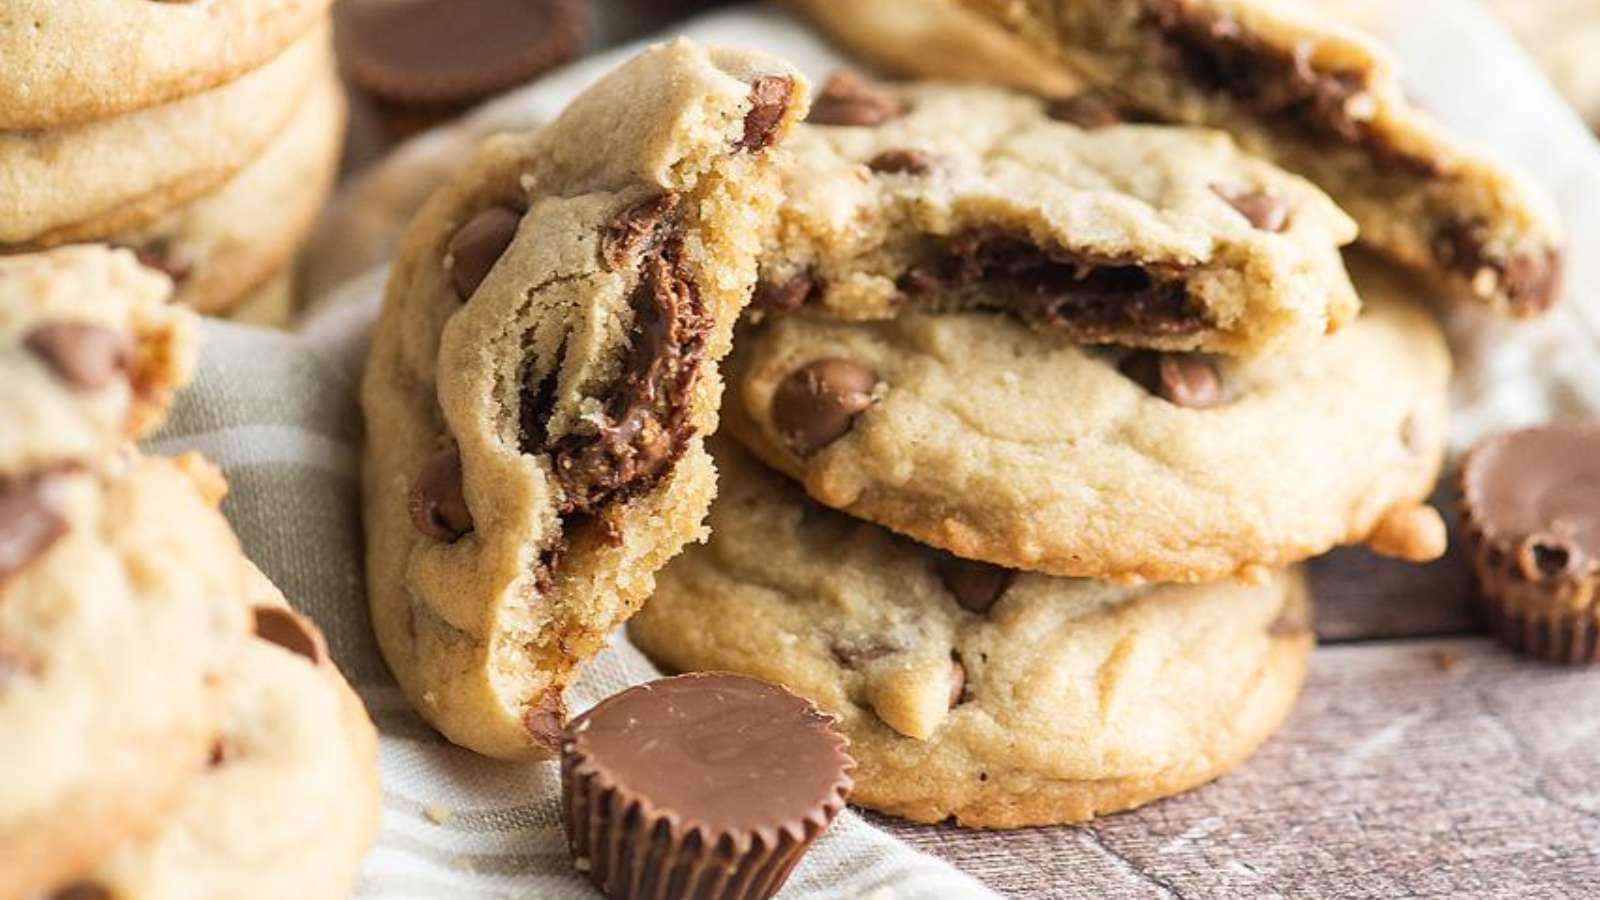 Chocolate Chip Reese’s Peanut Butter Cup Stuffed Cookies recipe by XoxoBella.